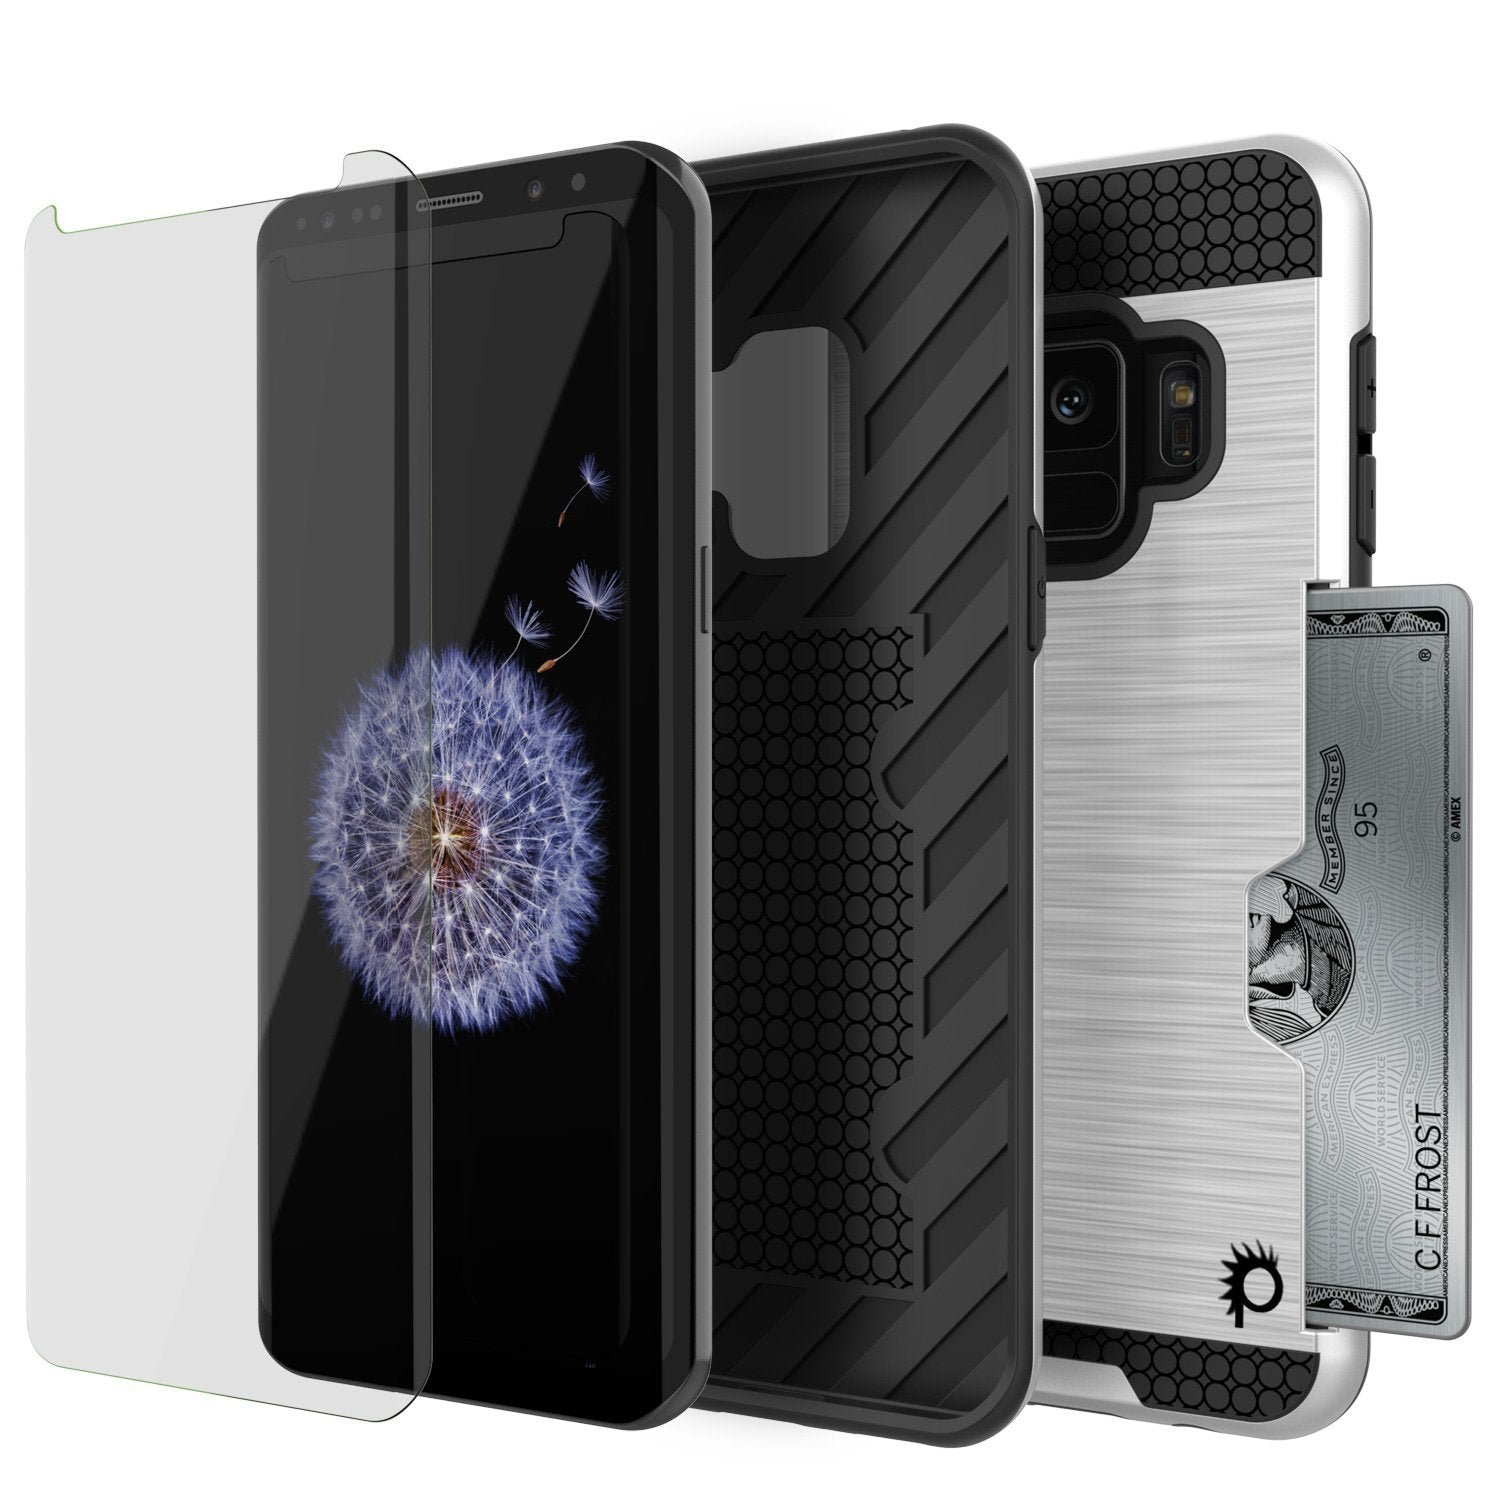 Galaxy S9 Case, PUNKcase [SLOT Series] [Slim Fit] Dual-Layer Armor Cover w/Integrated Anti-Shock System, Credit Card Slot & Screen Protector [White] - PunkCase NZ